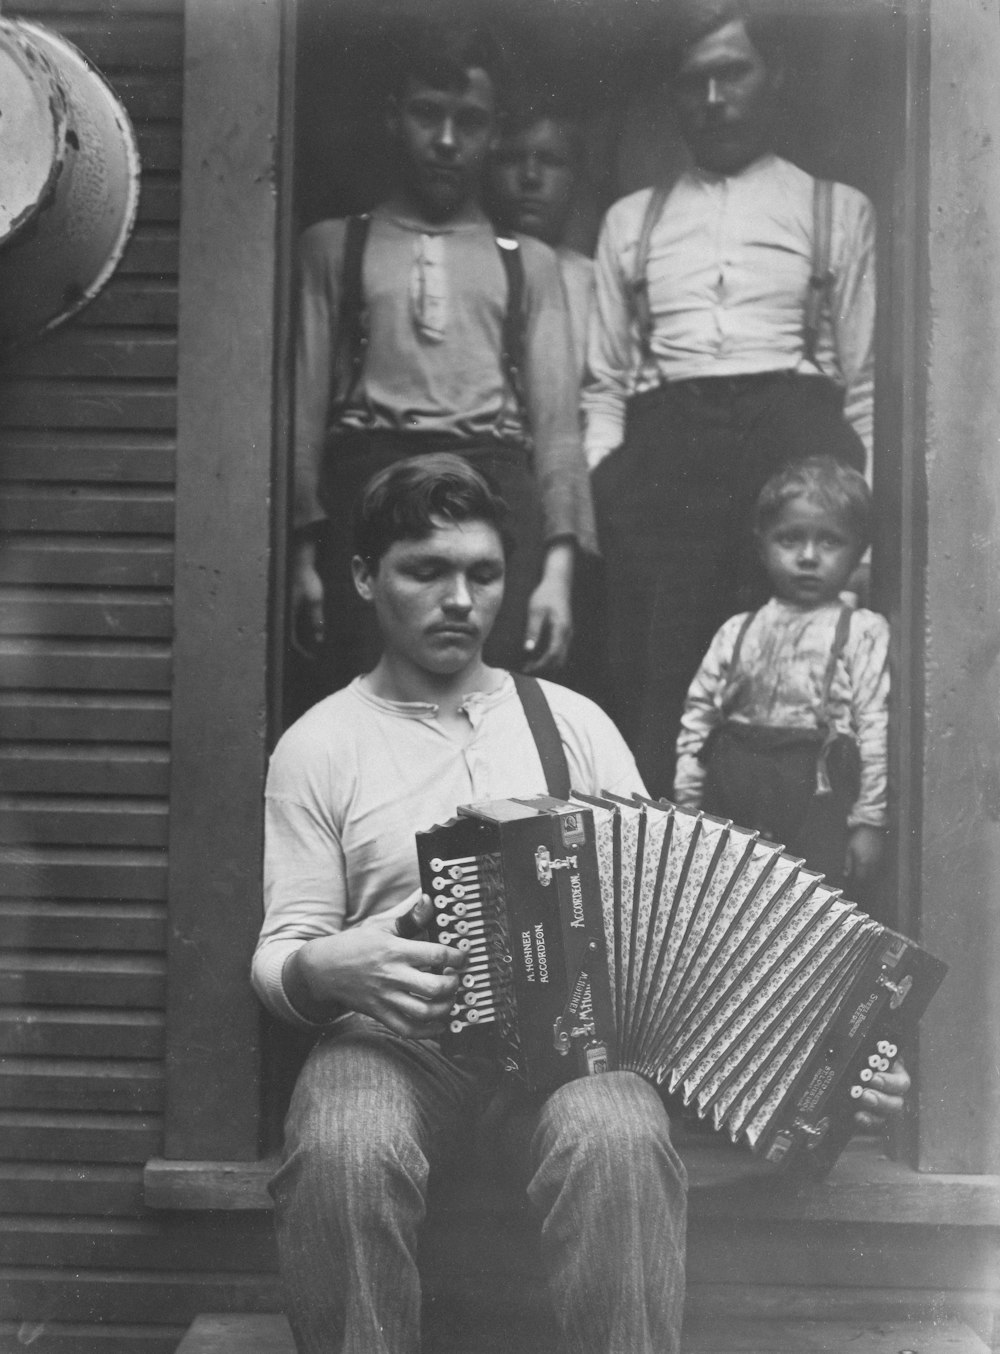 an old photo of a man playing an accordion